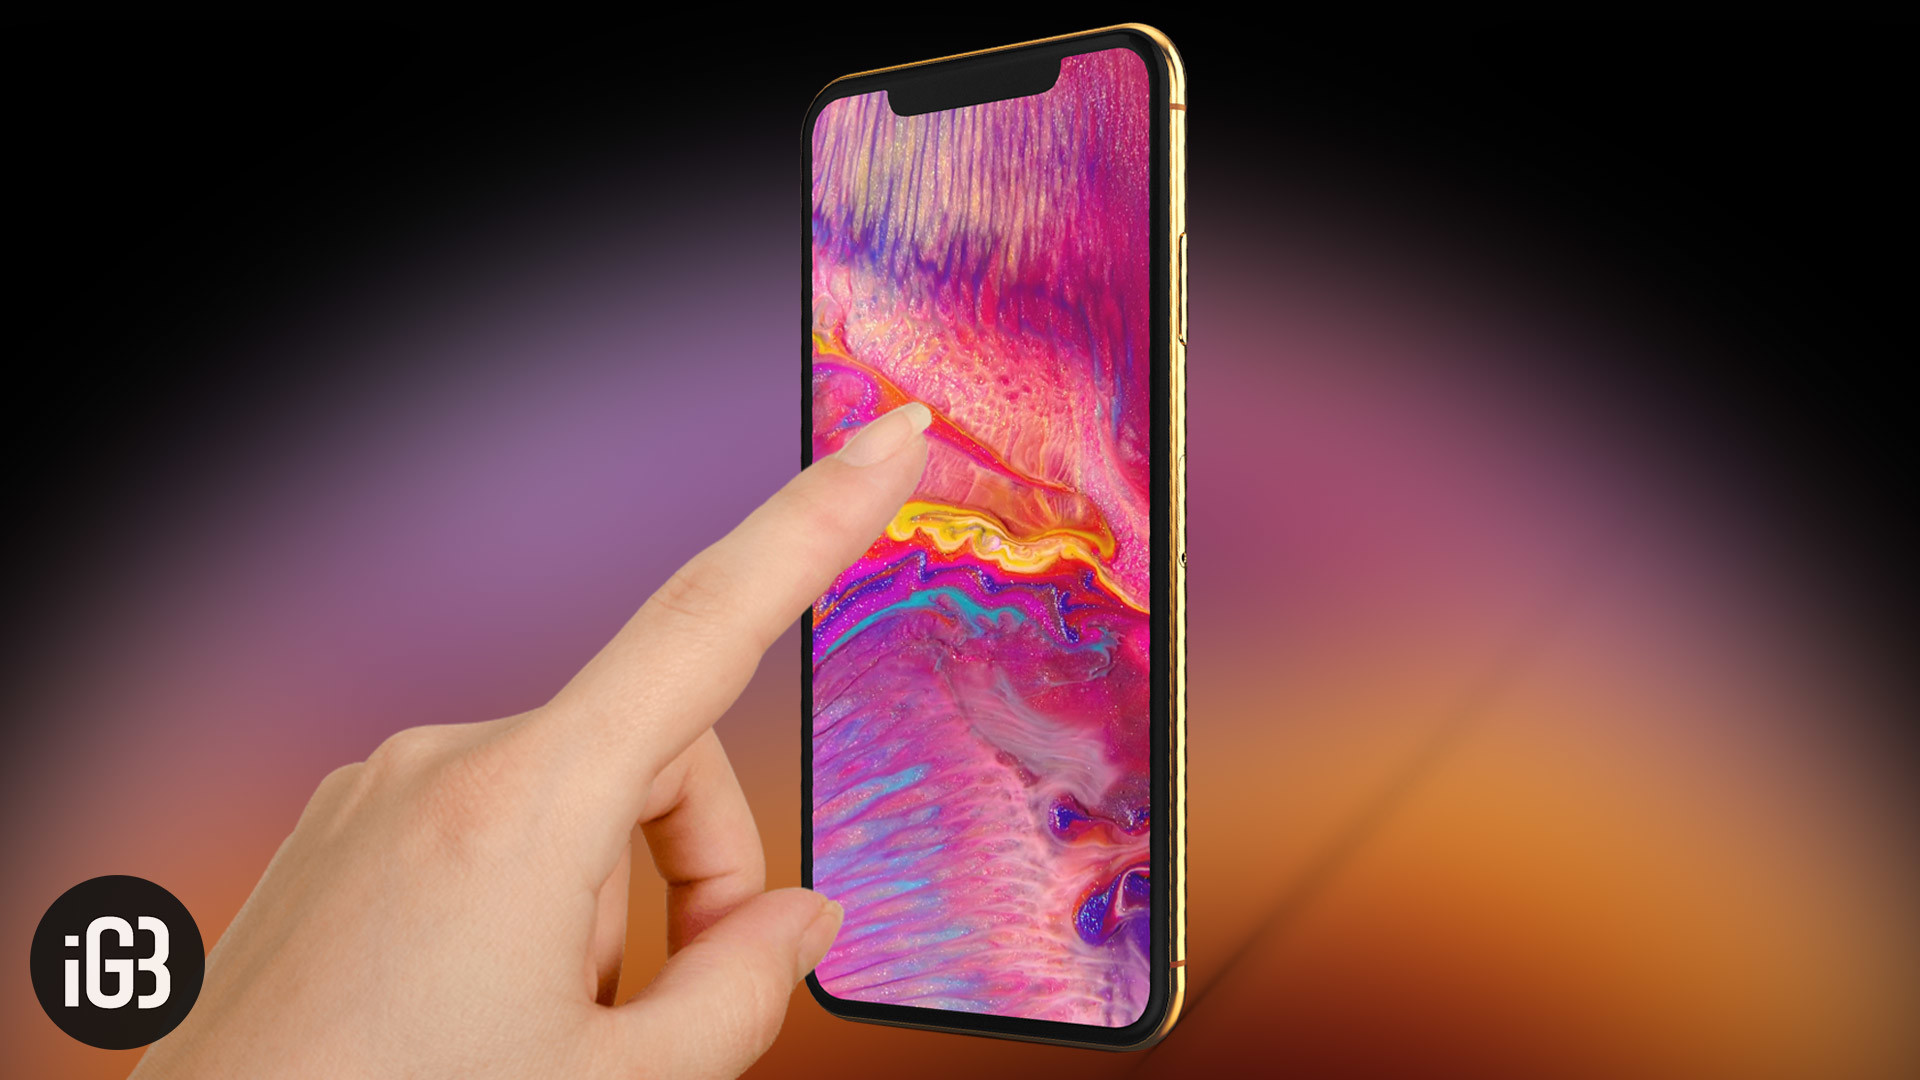 1920x1080 Best Live Wallpaper Apps for iPhone Xs and Xs Max in 2019: The Gorgeous  Themes